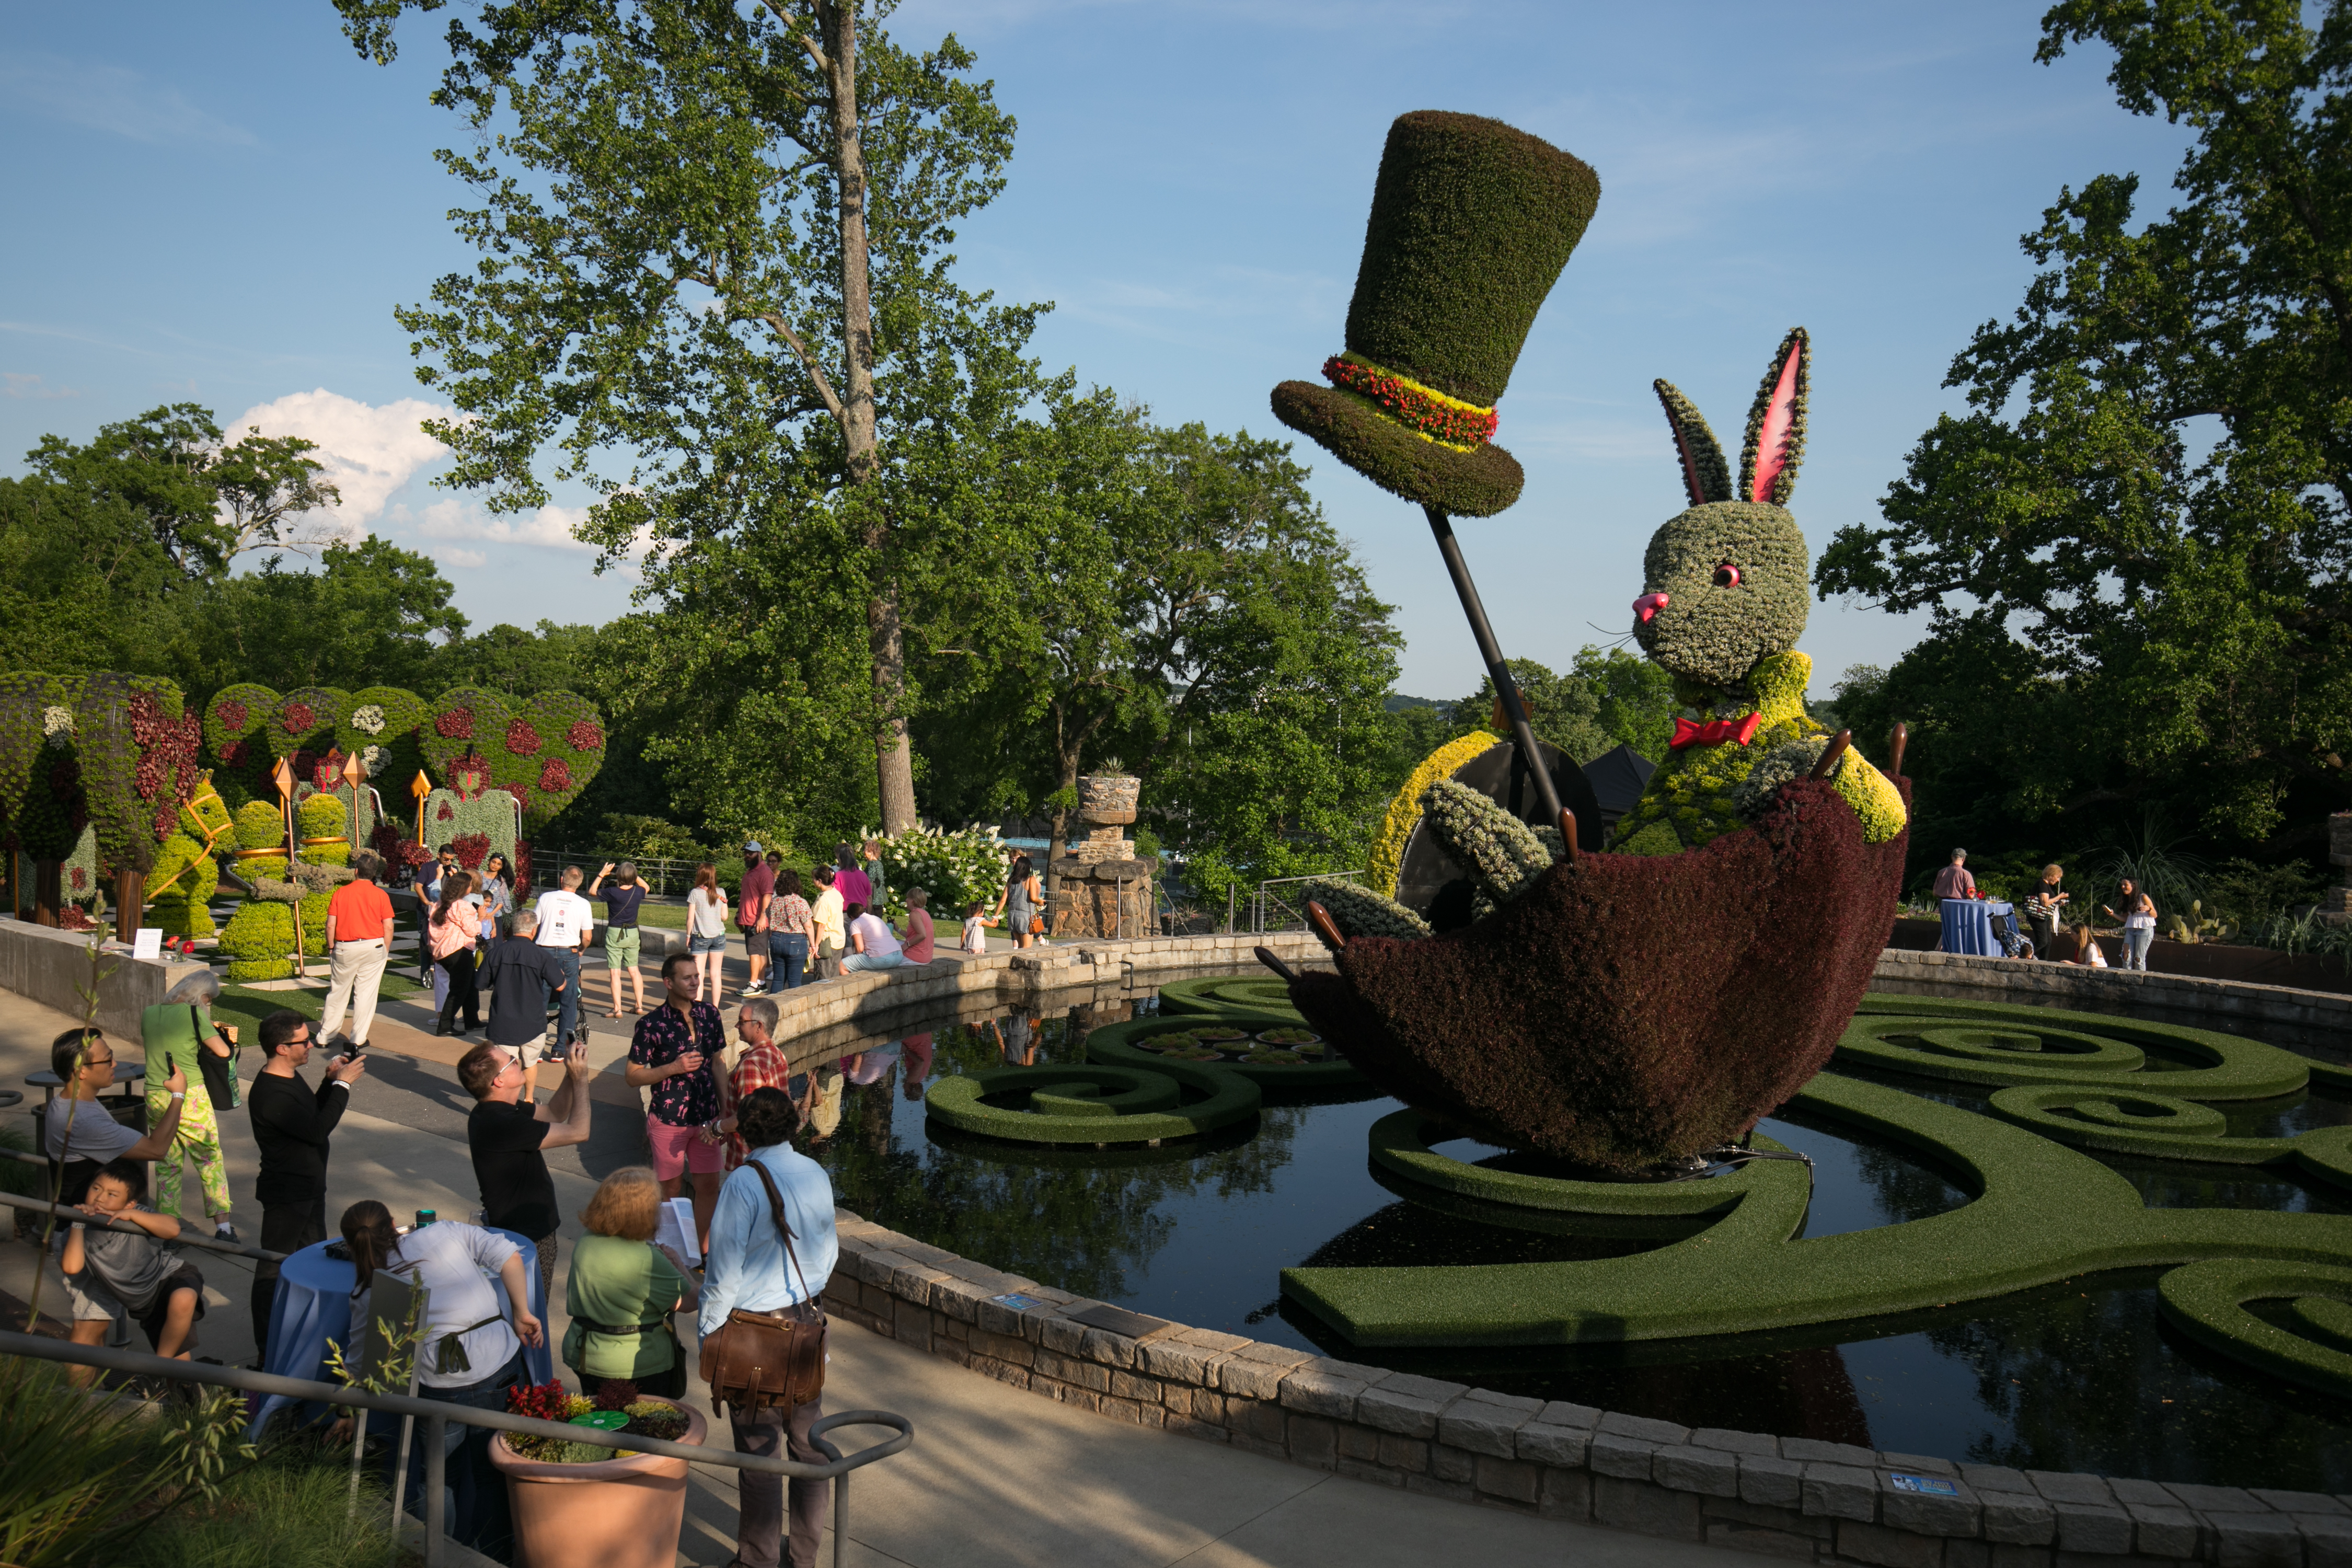 You can visit a super-cool 'Alice in Wonderland' garden in Atlanta right now